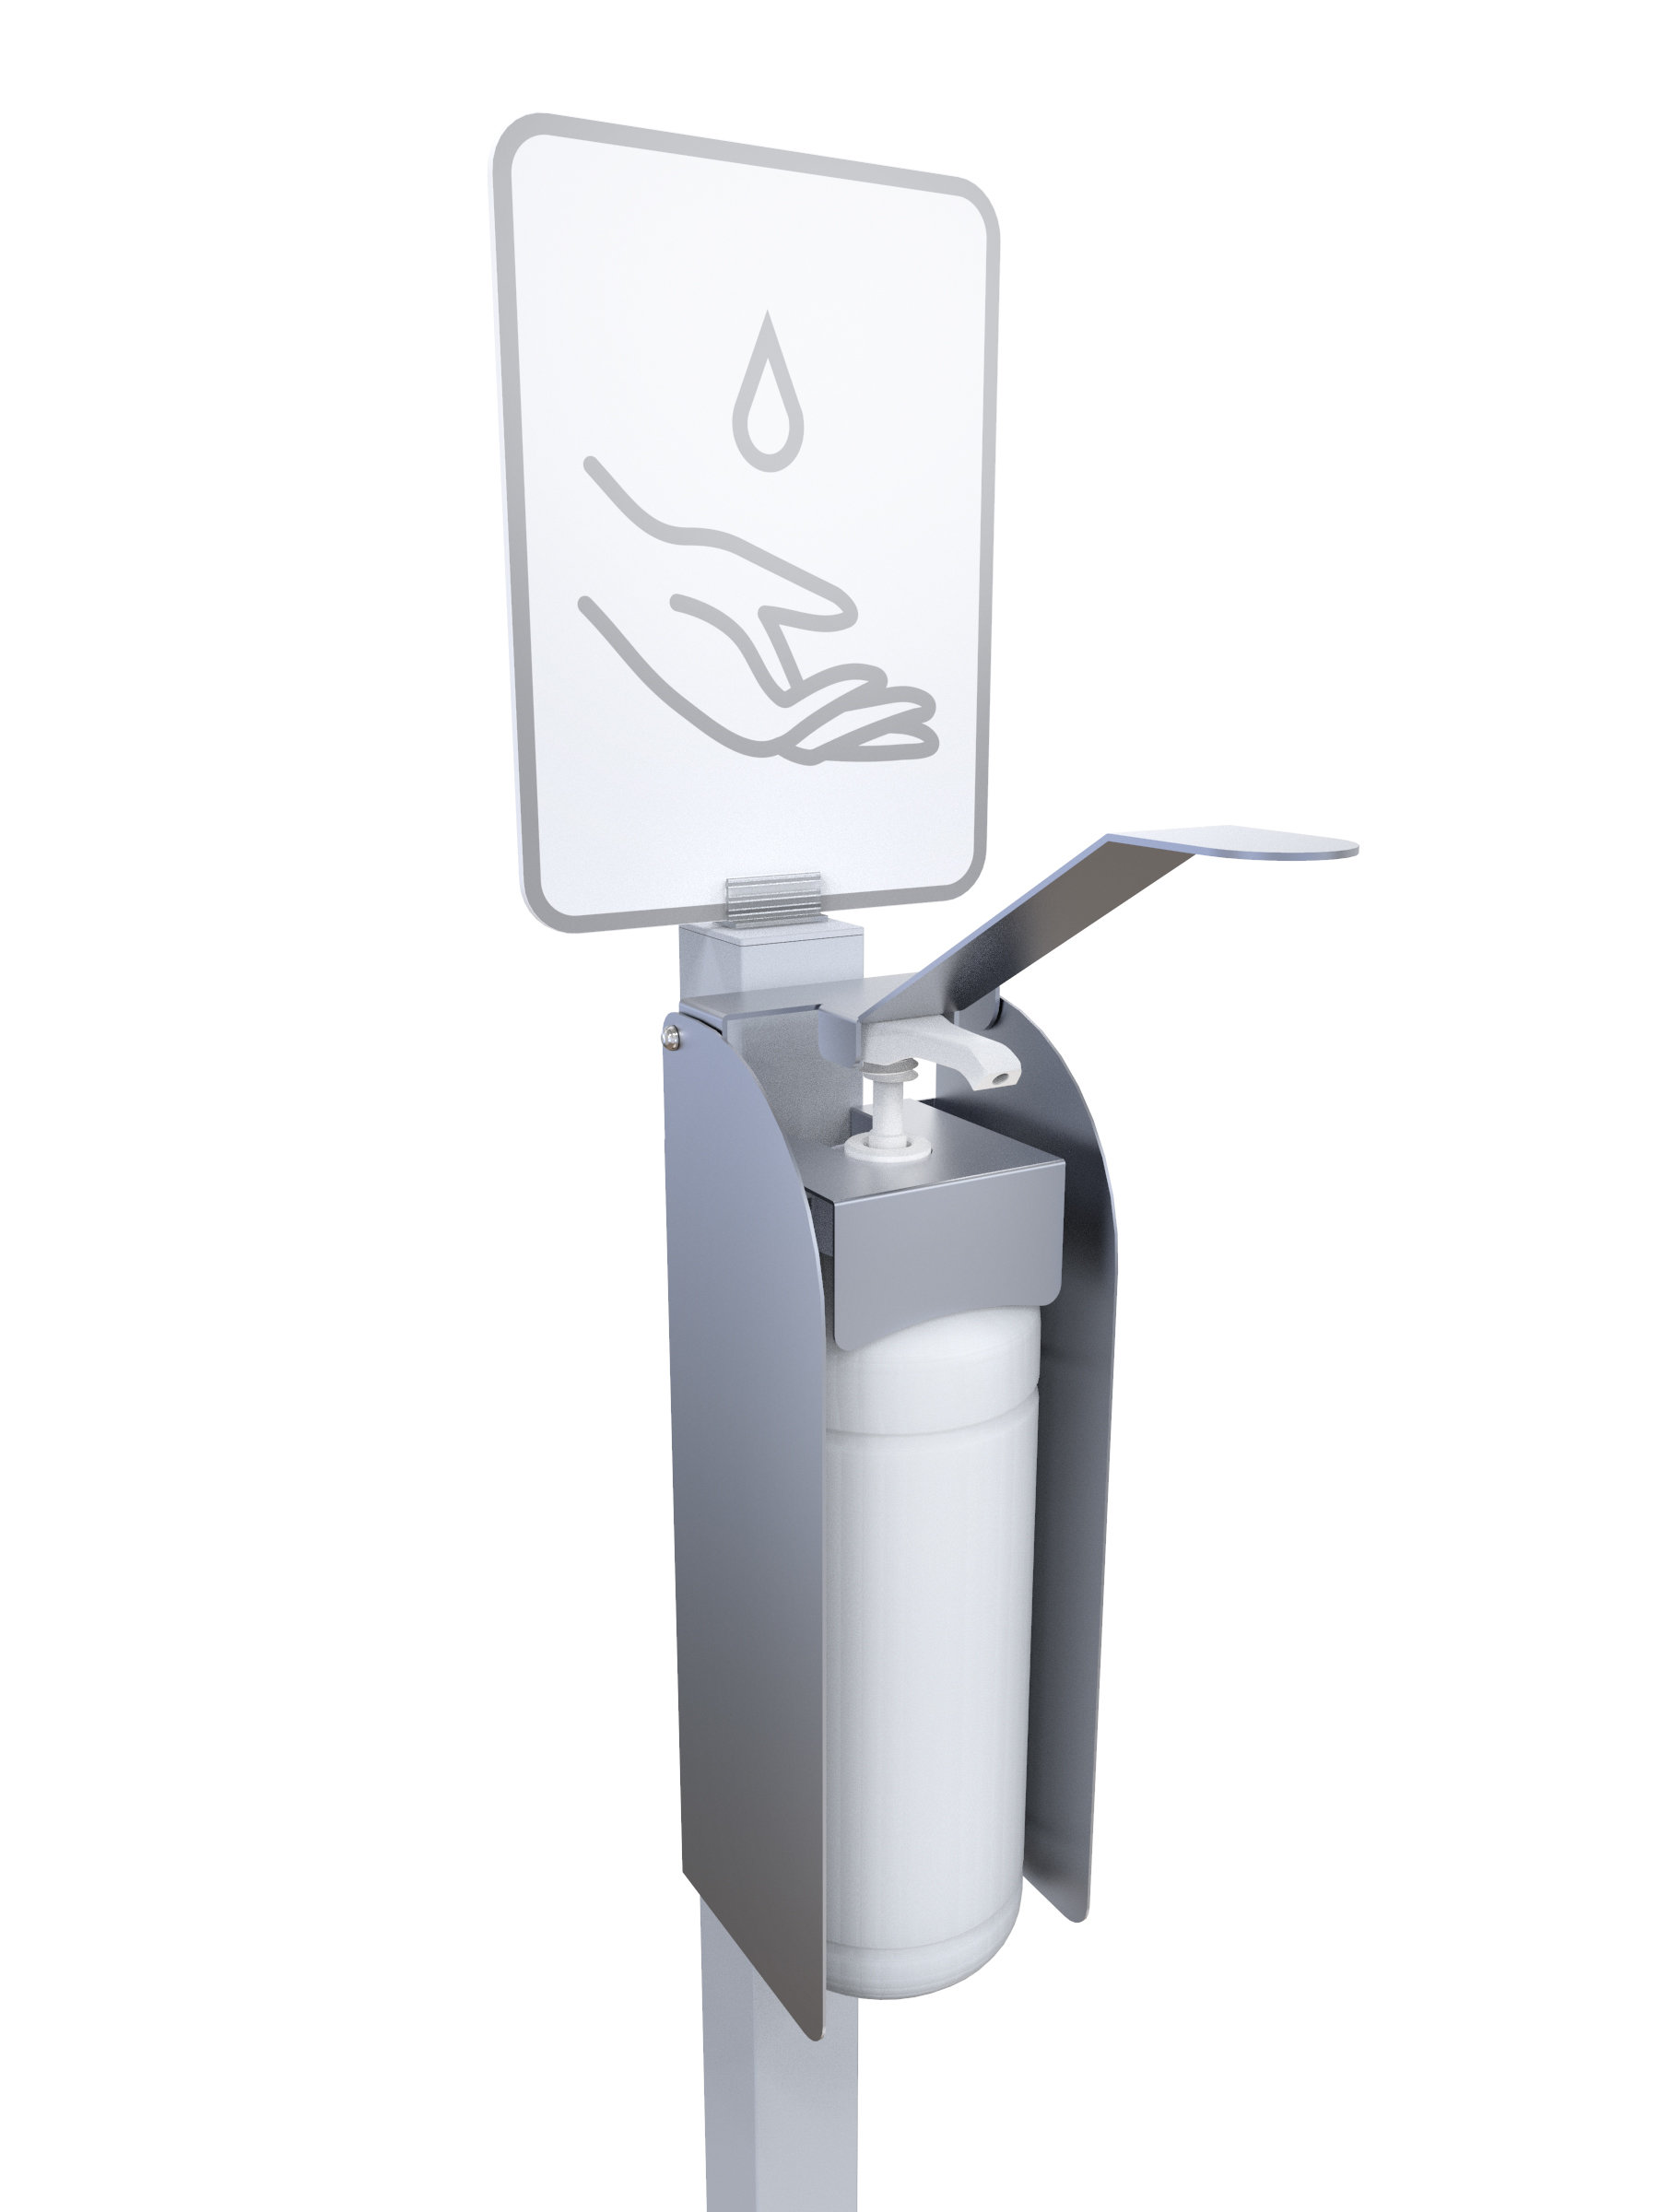 Free-standing elbow operated disinfecting dispenser, stainless steel. www.ontimeprint.co.uk